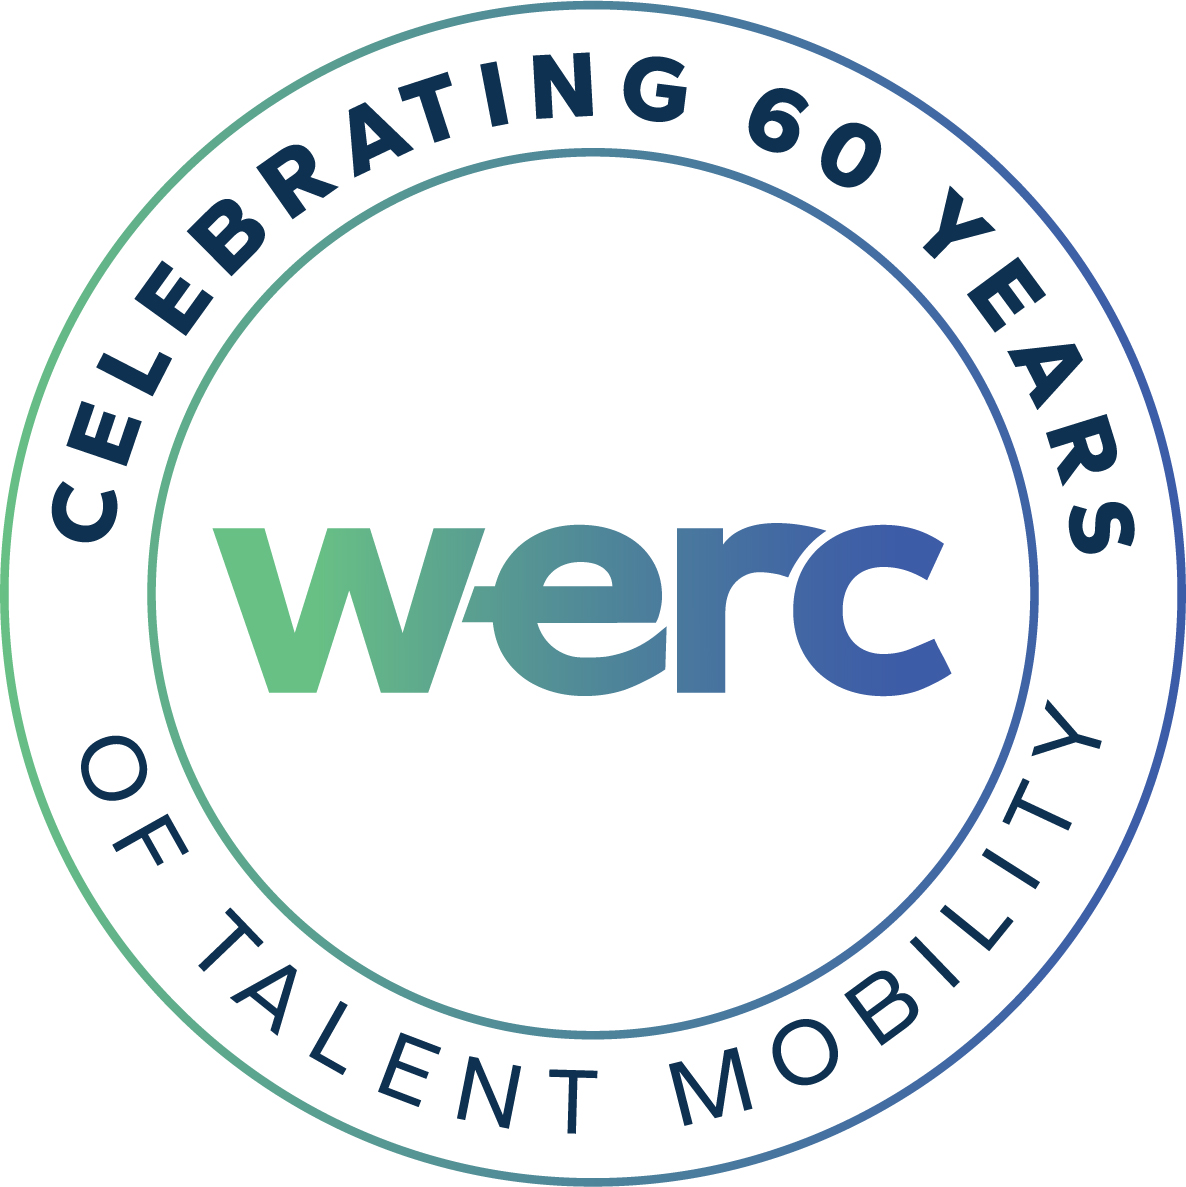 WERC - Celebrating 60 years of talent mobility